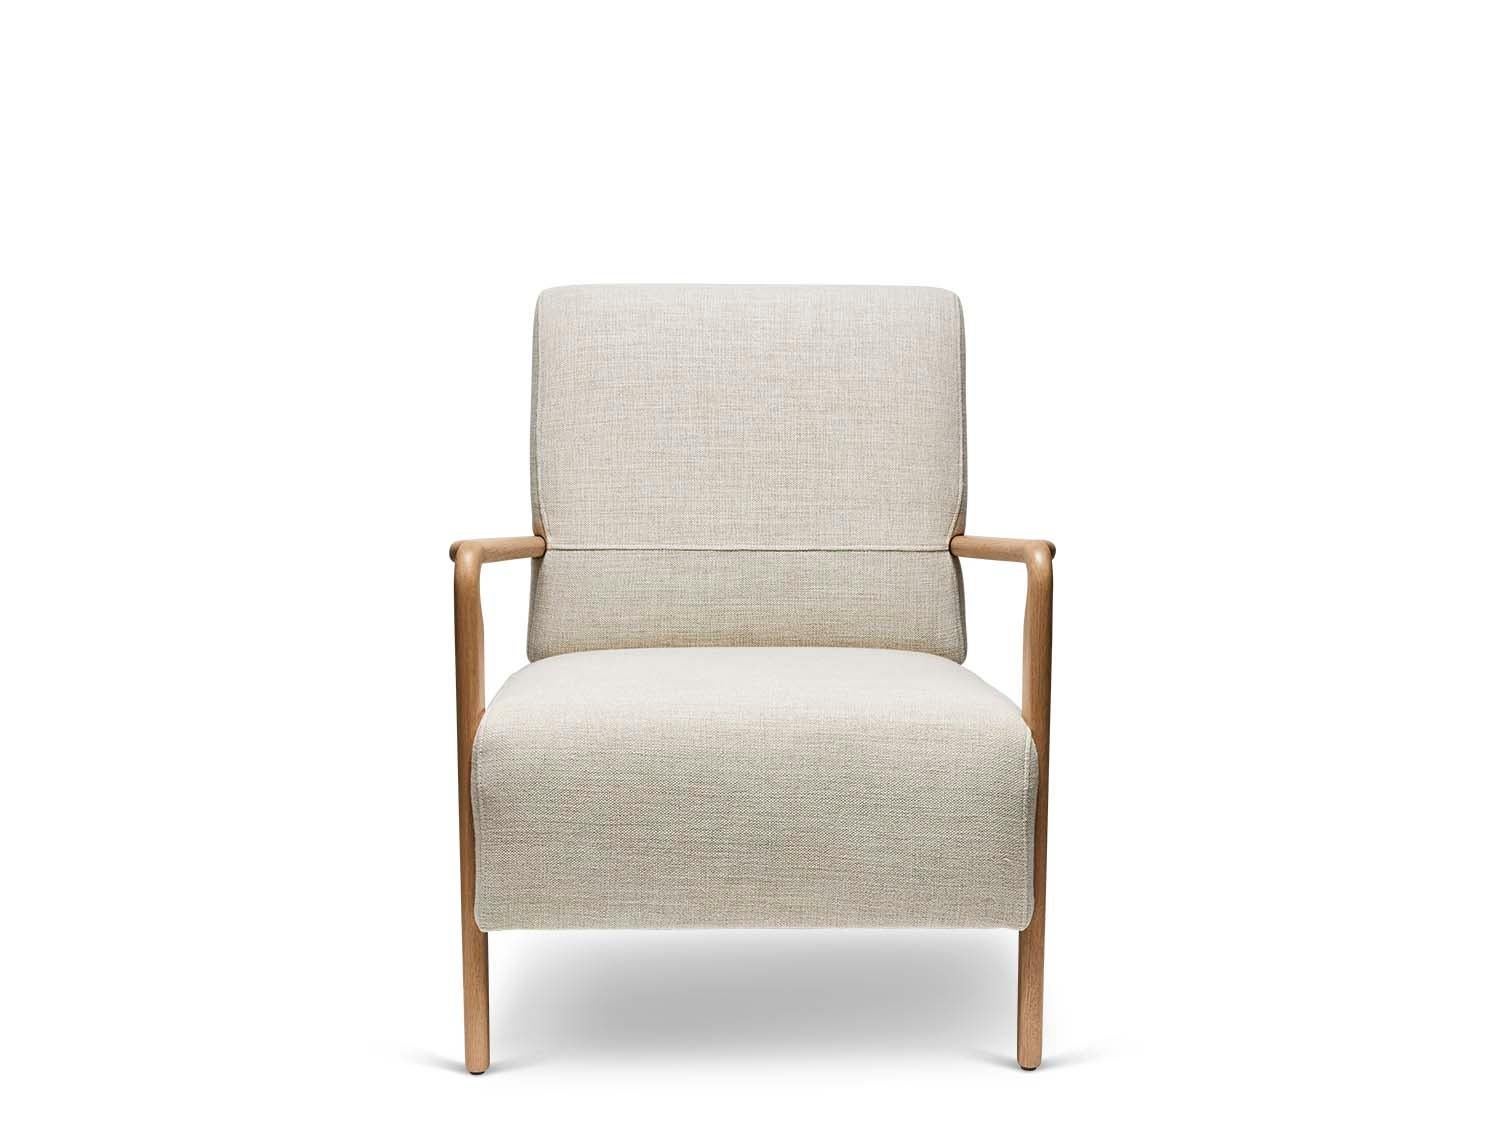 The Niguel lounge chair is a French inspired design with a sculptural solid wood frame and an upholstered seat. 

The Lawson-Fenning Collection is designed and handmade in Los Angeles, California. Reach out to discover what options are currently in